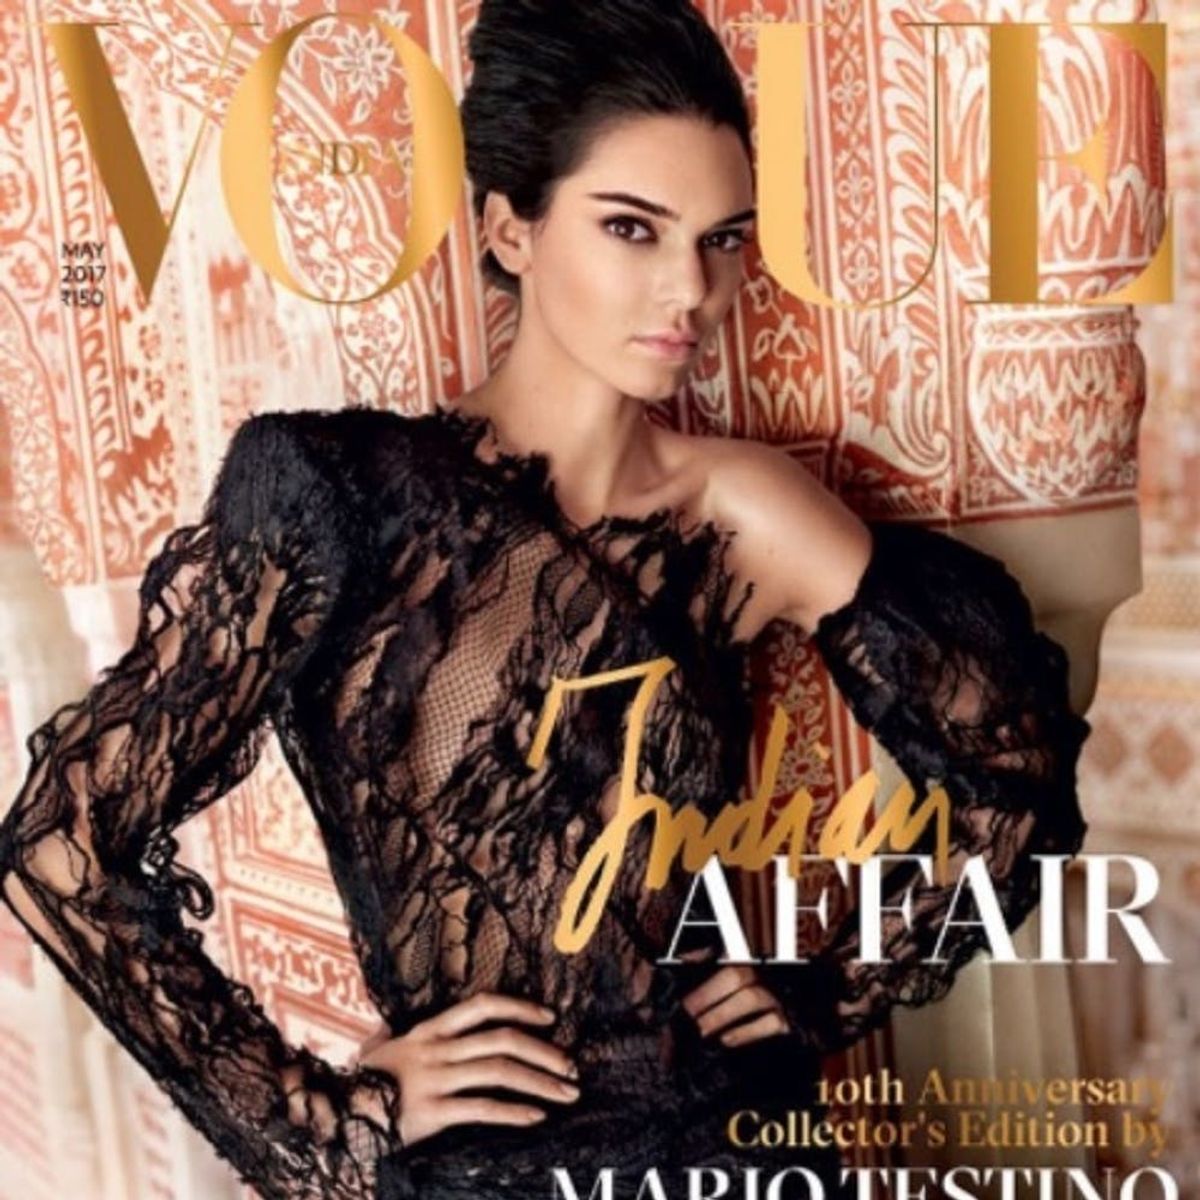 Kendall Jenner’s Vogue India Cover Has Sparked ANOTHER Controversy